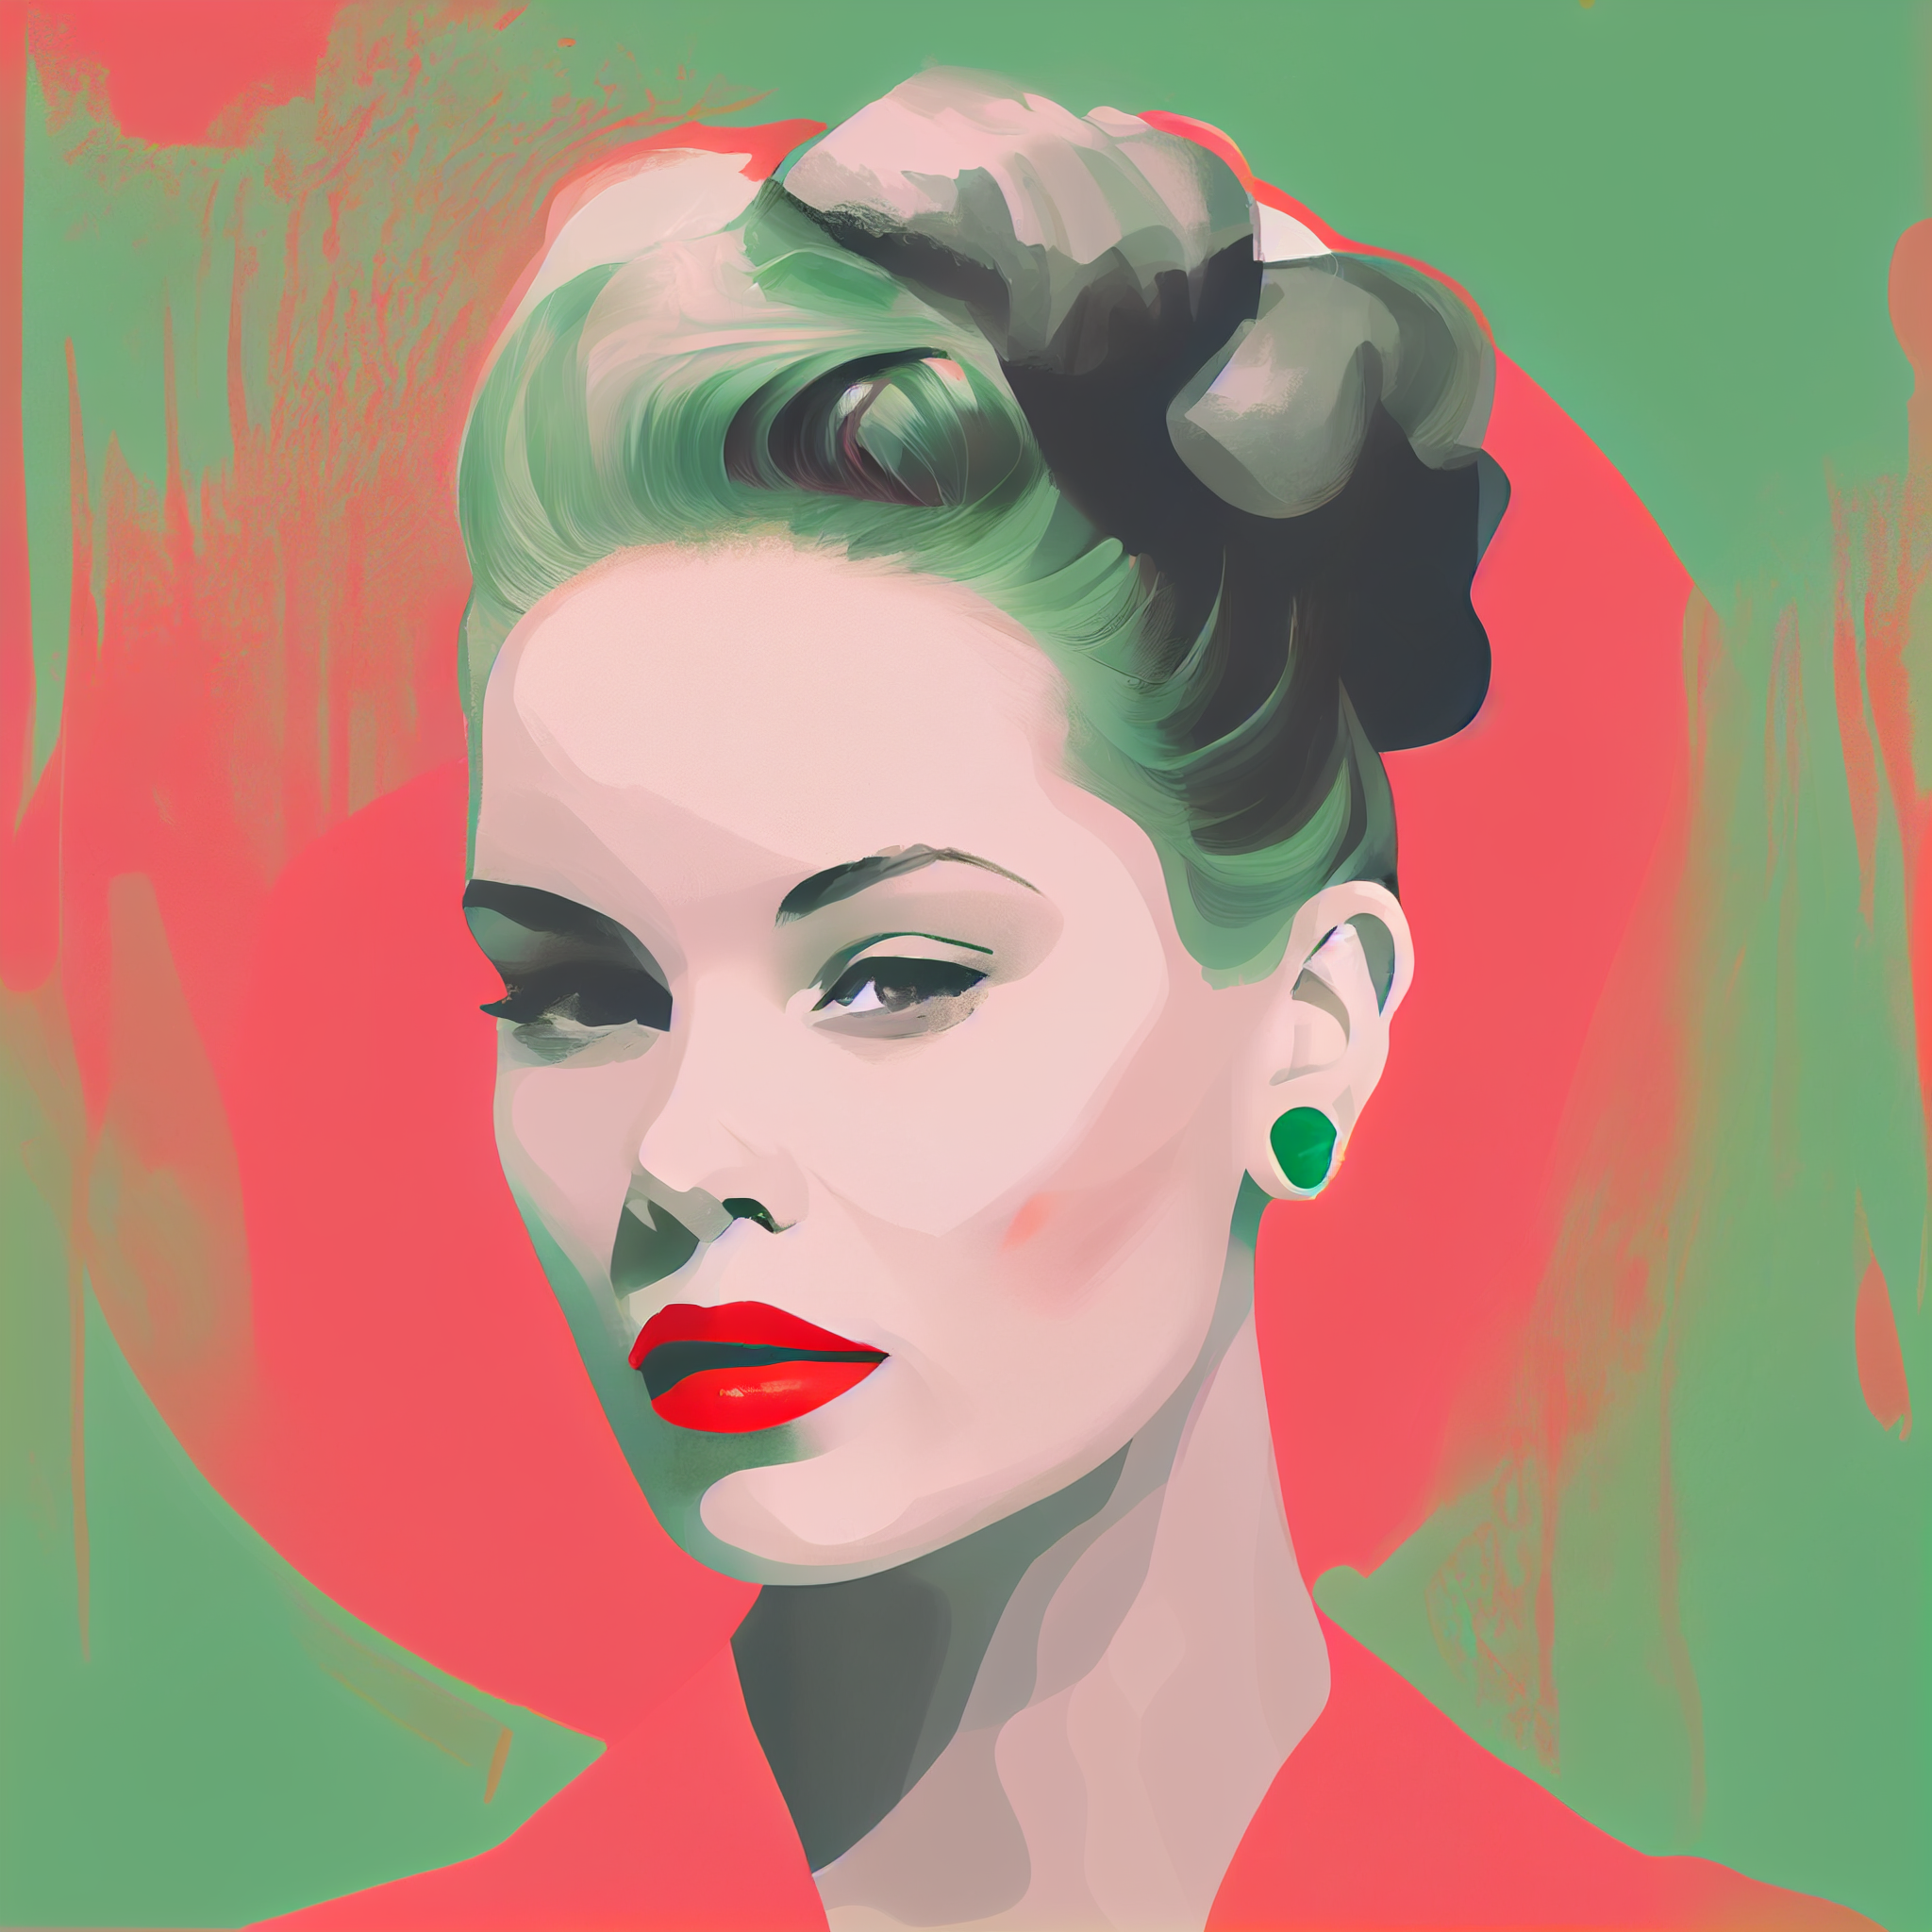 Brushed Beauty: A Vibrant Abstract Art Print of a Lady in Pink and Green with Red Lips and a Bun